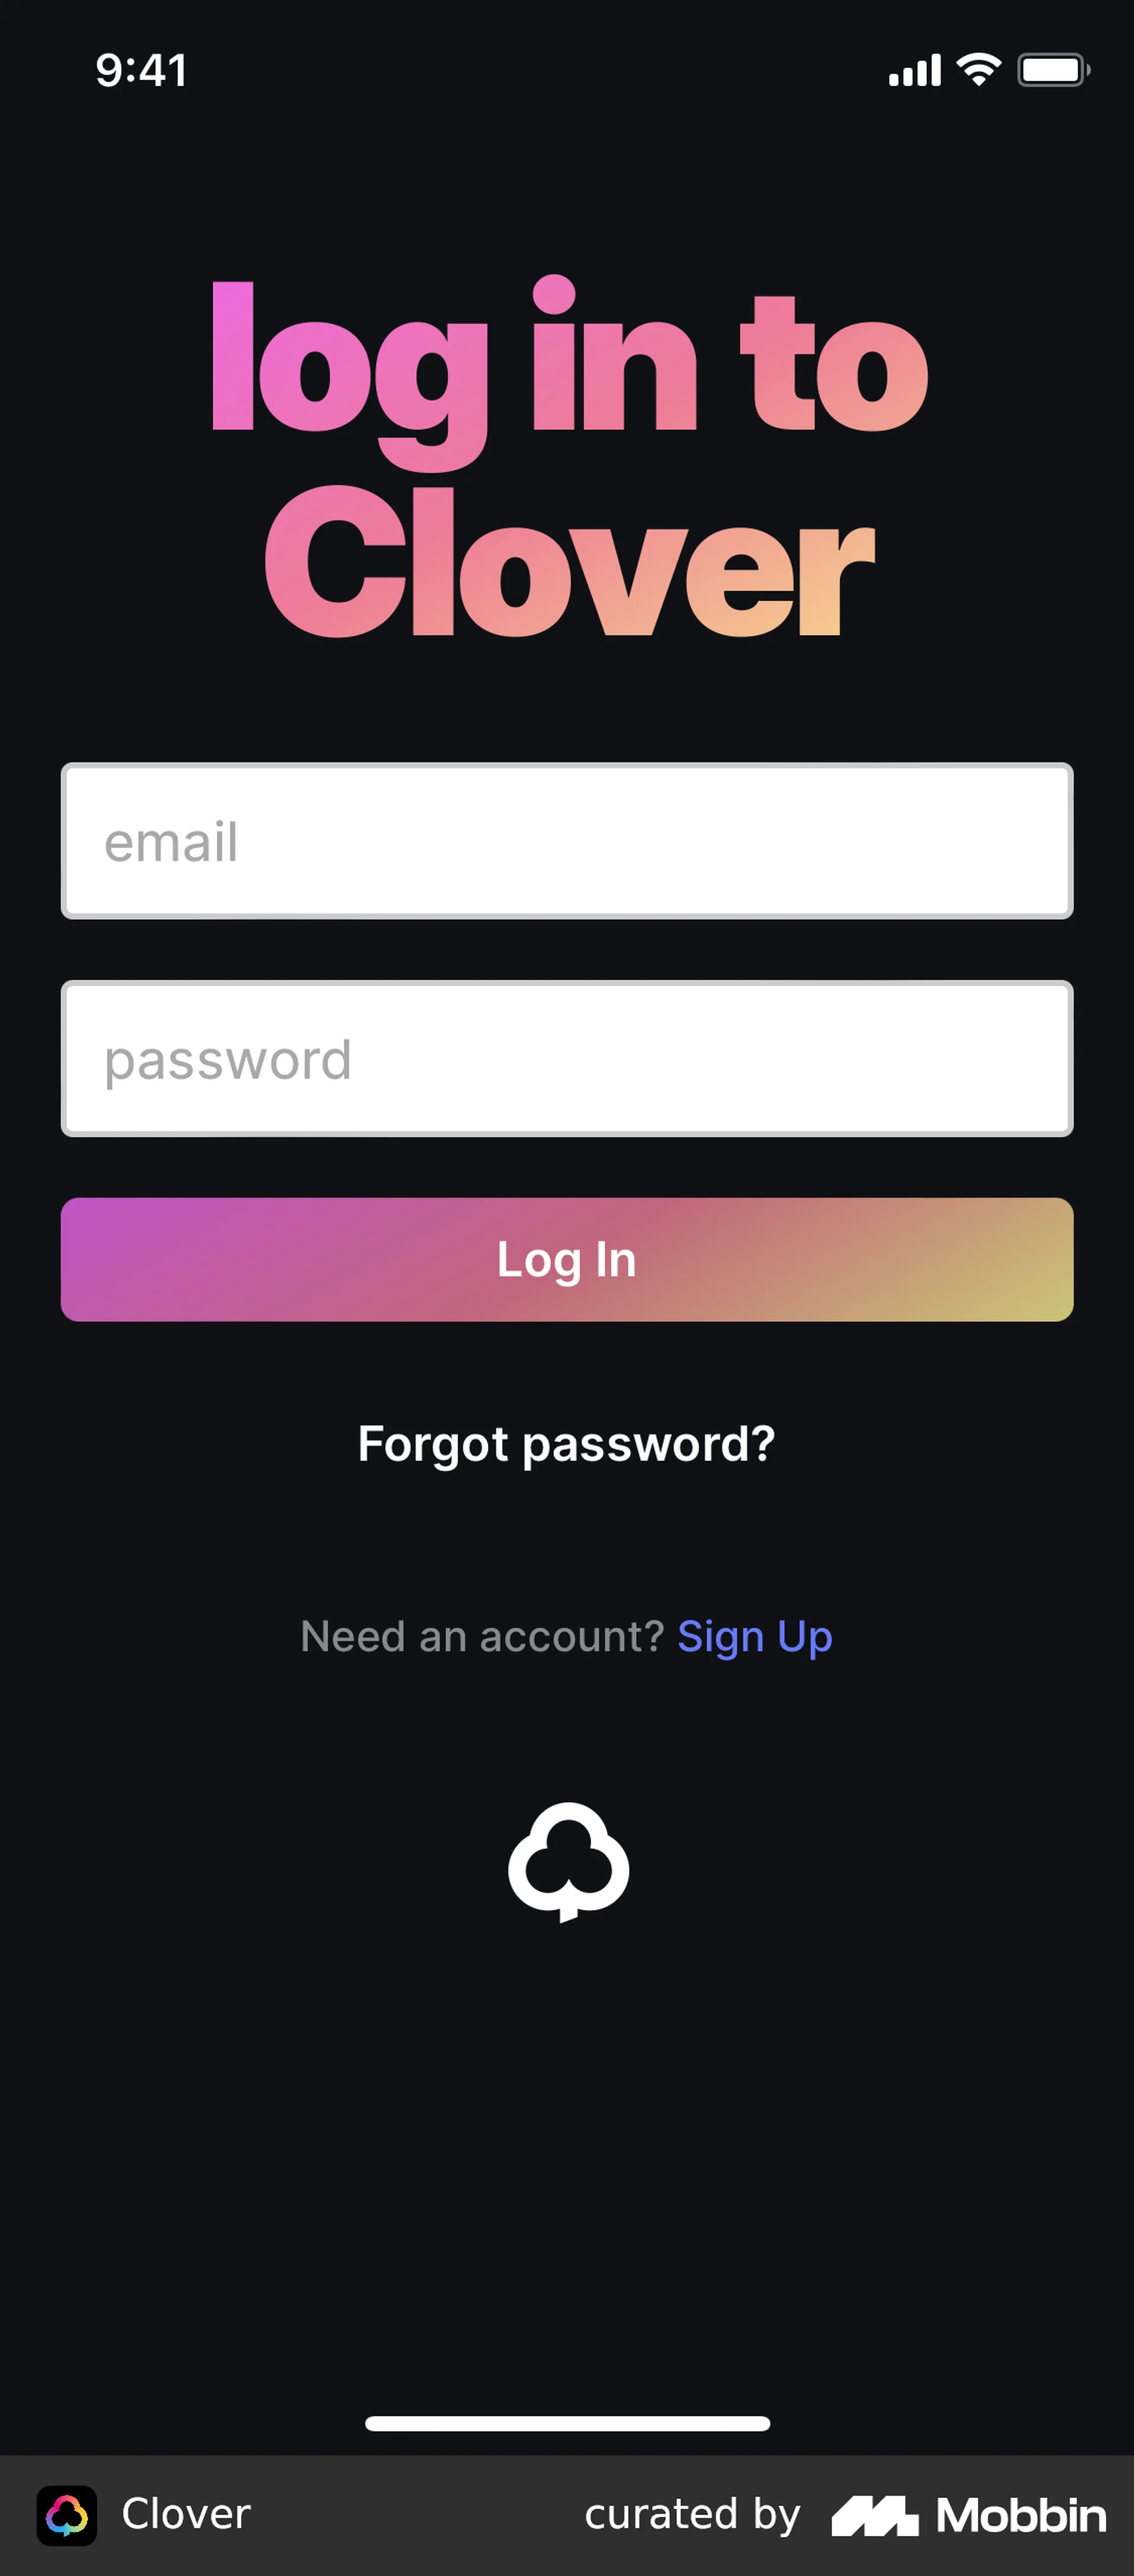 clovershsh posted: Cant log into the mobile app.